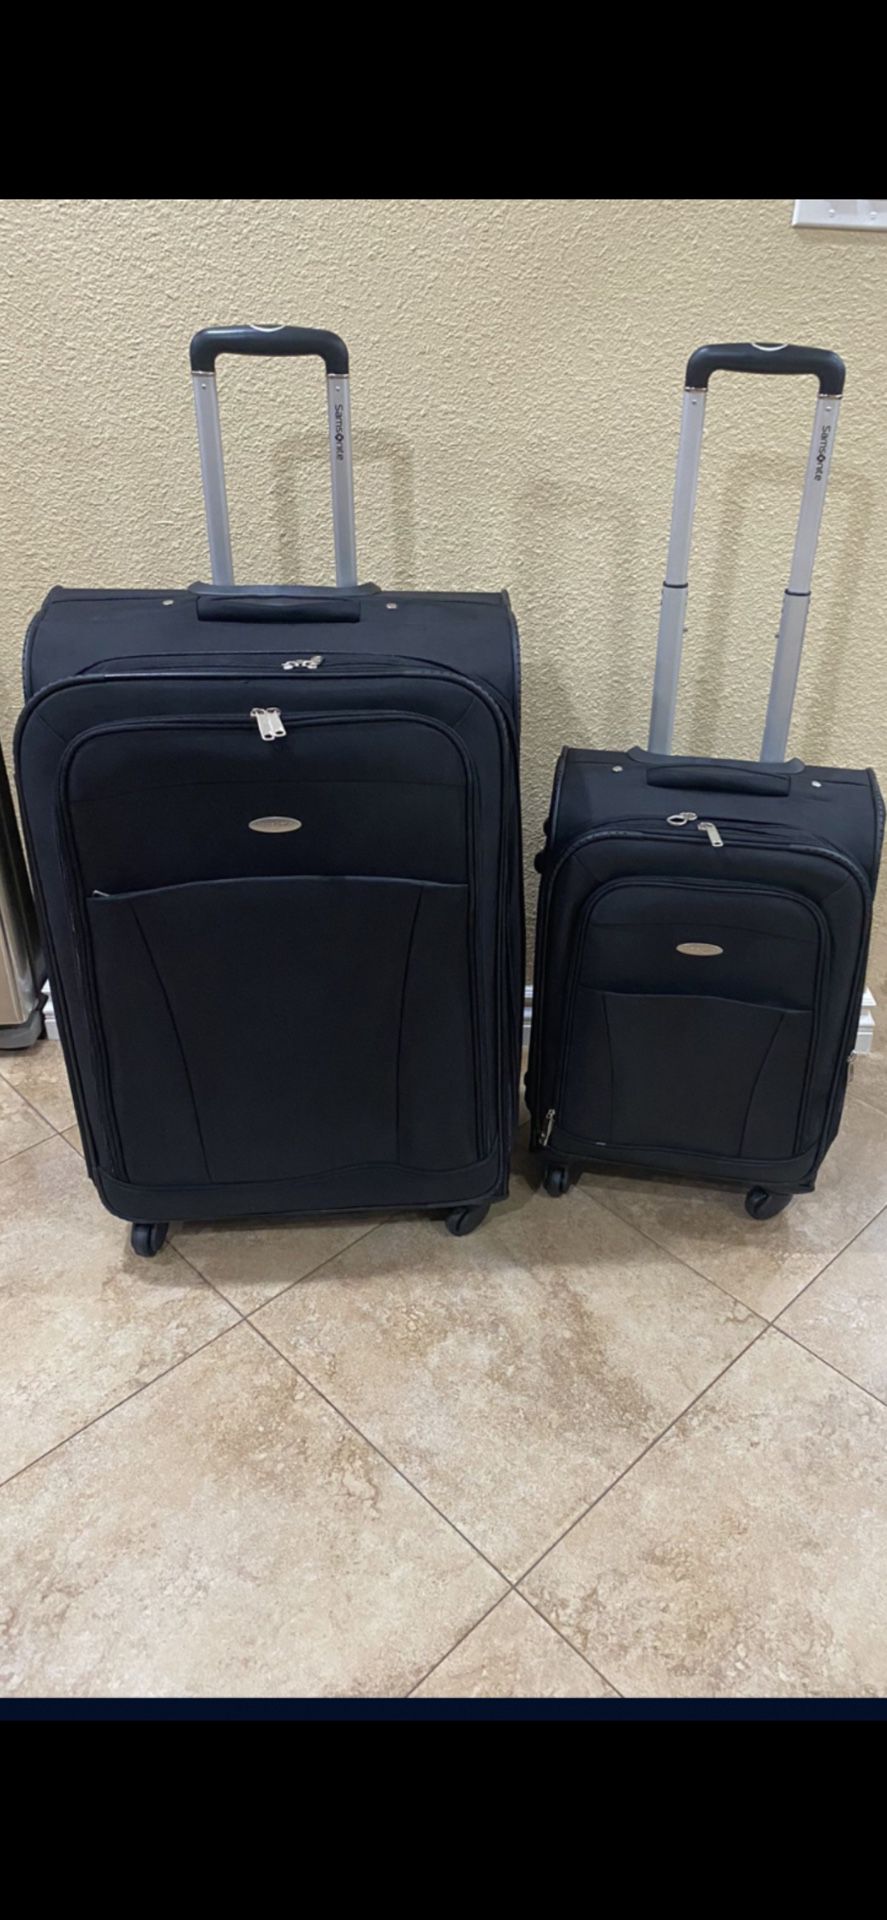 Samsonite 2 Pc Soft Side Spinner Luggage Set. Carry -On Is 22” / Check In Luggage Is 32” All TSA Approved  In Black